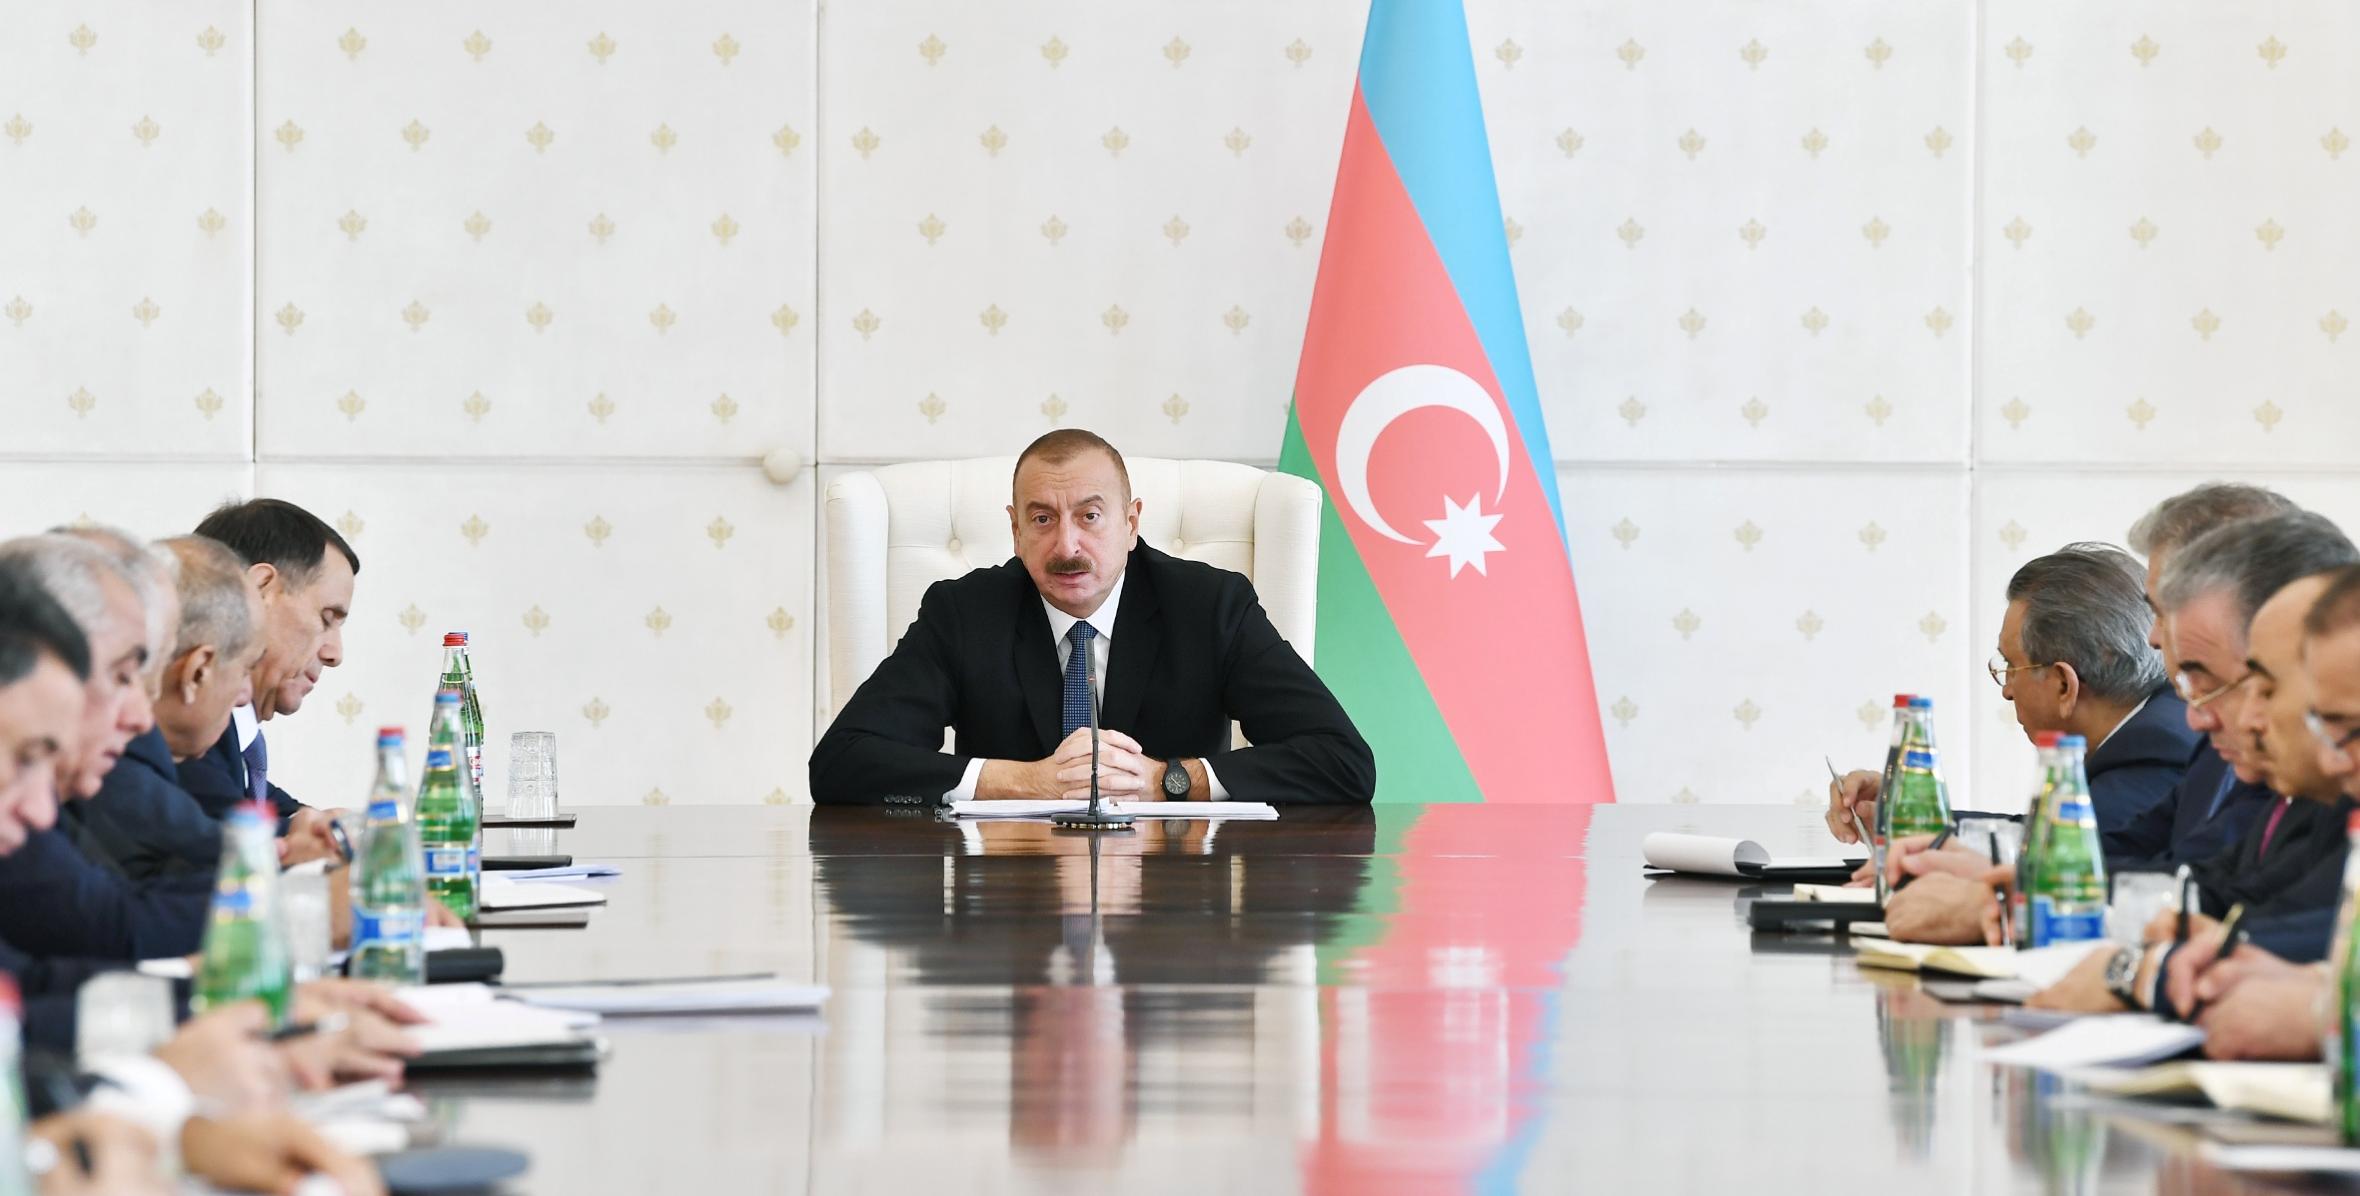 Ilham Aliyev chaired meeting of Cabinet of Ministers on results of socio-economic development in nine months of 2018 and future objectives